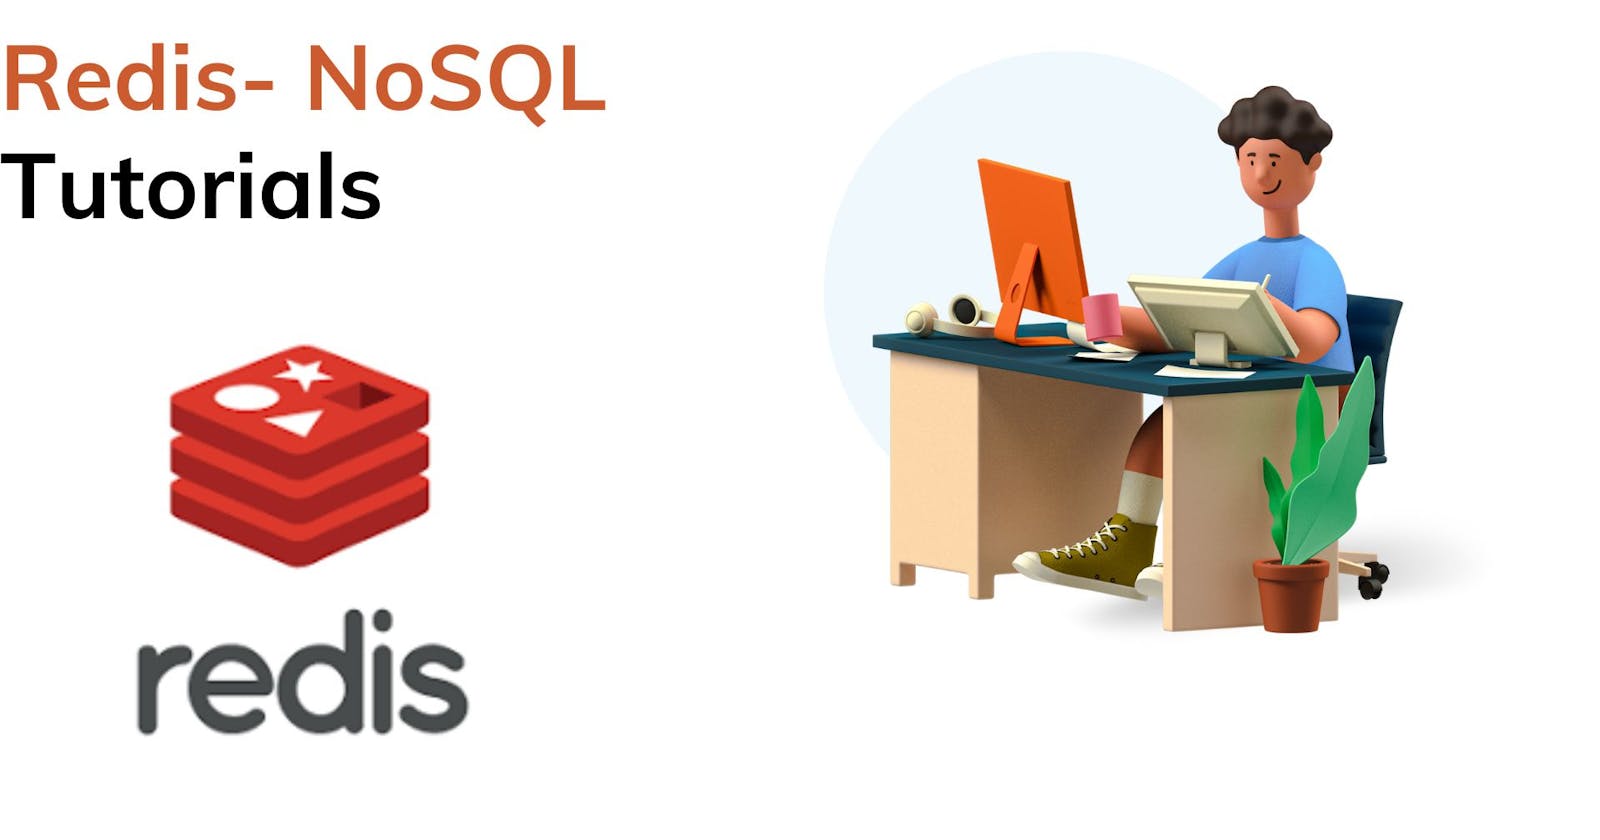 Top Redis NoSQL interview questions and answers- Part-1.